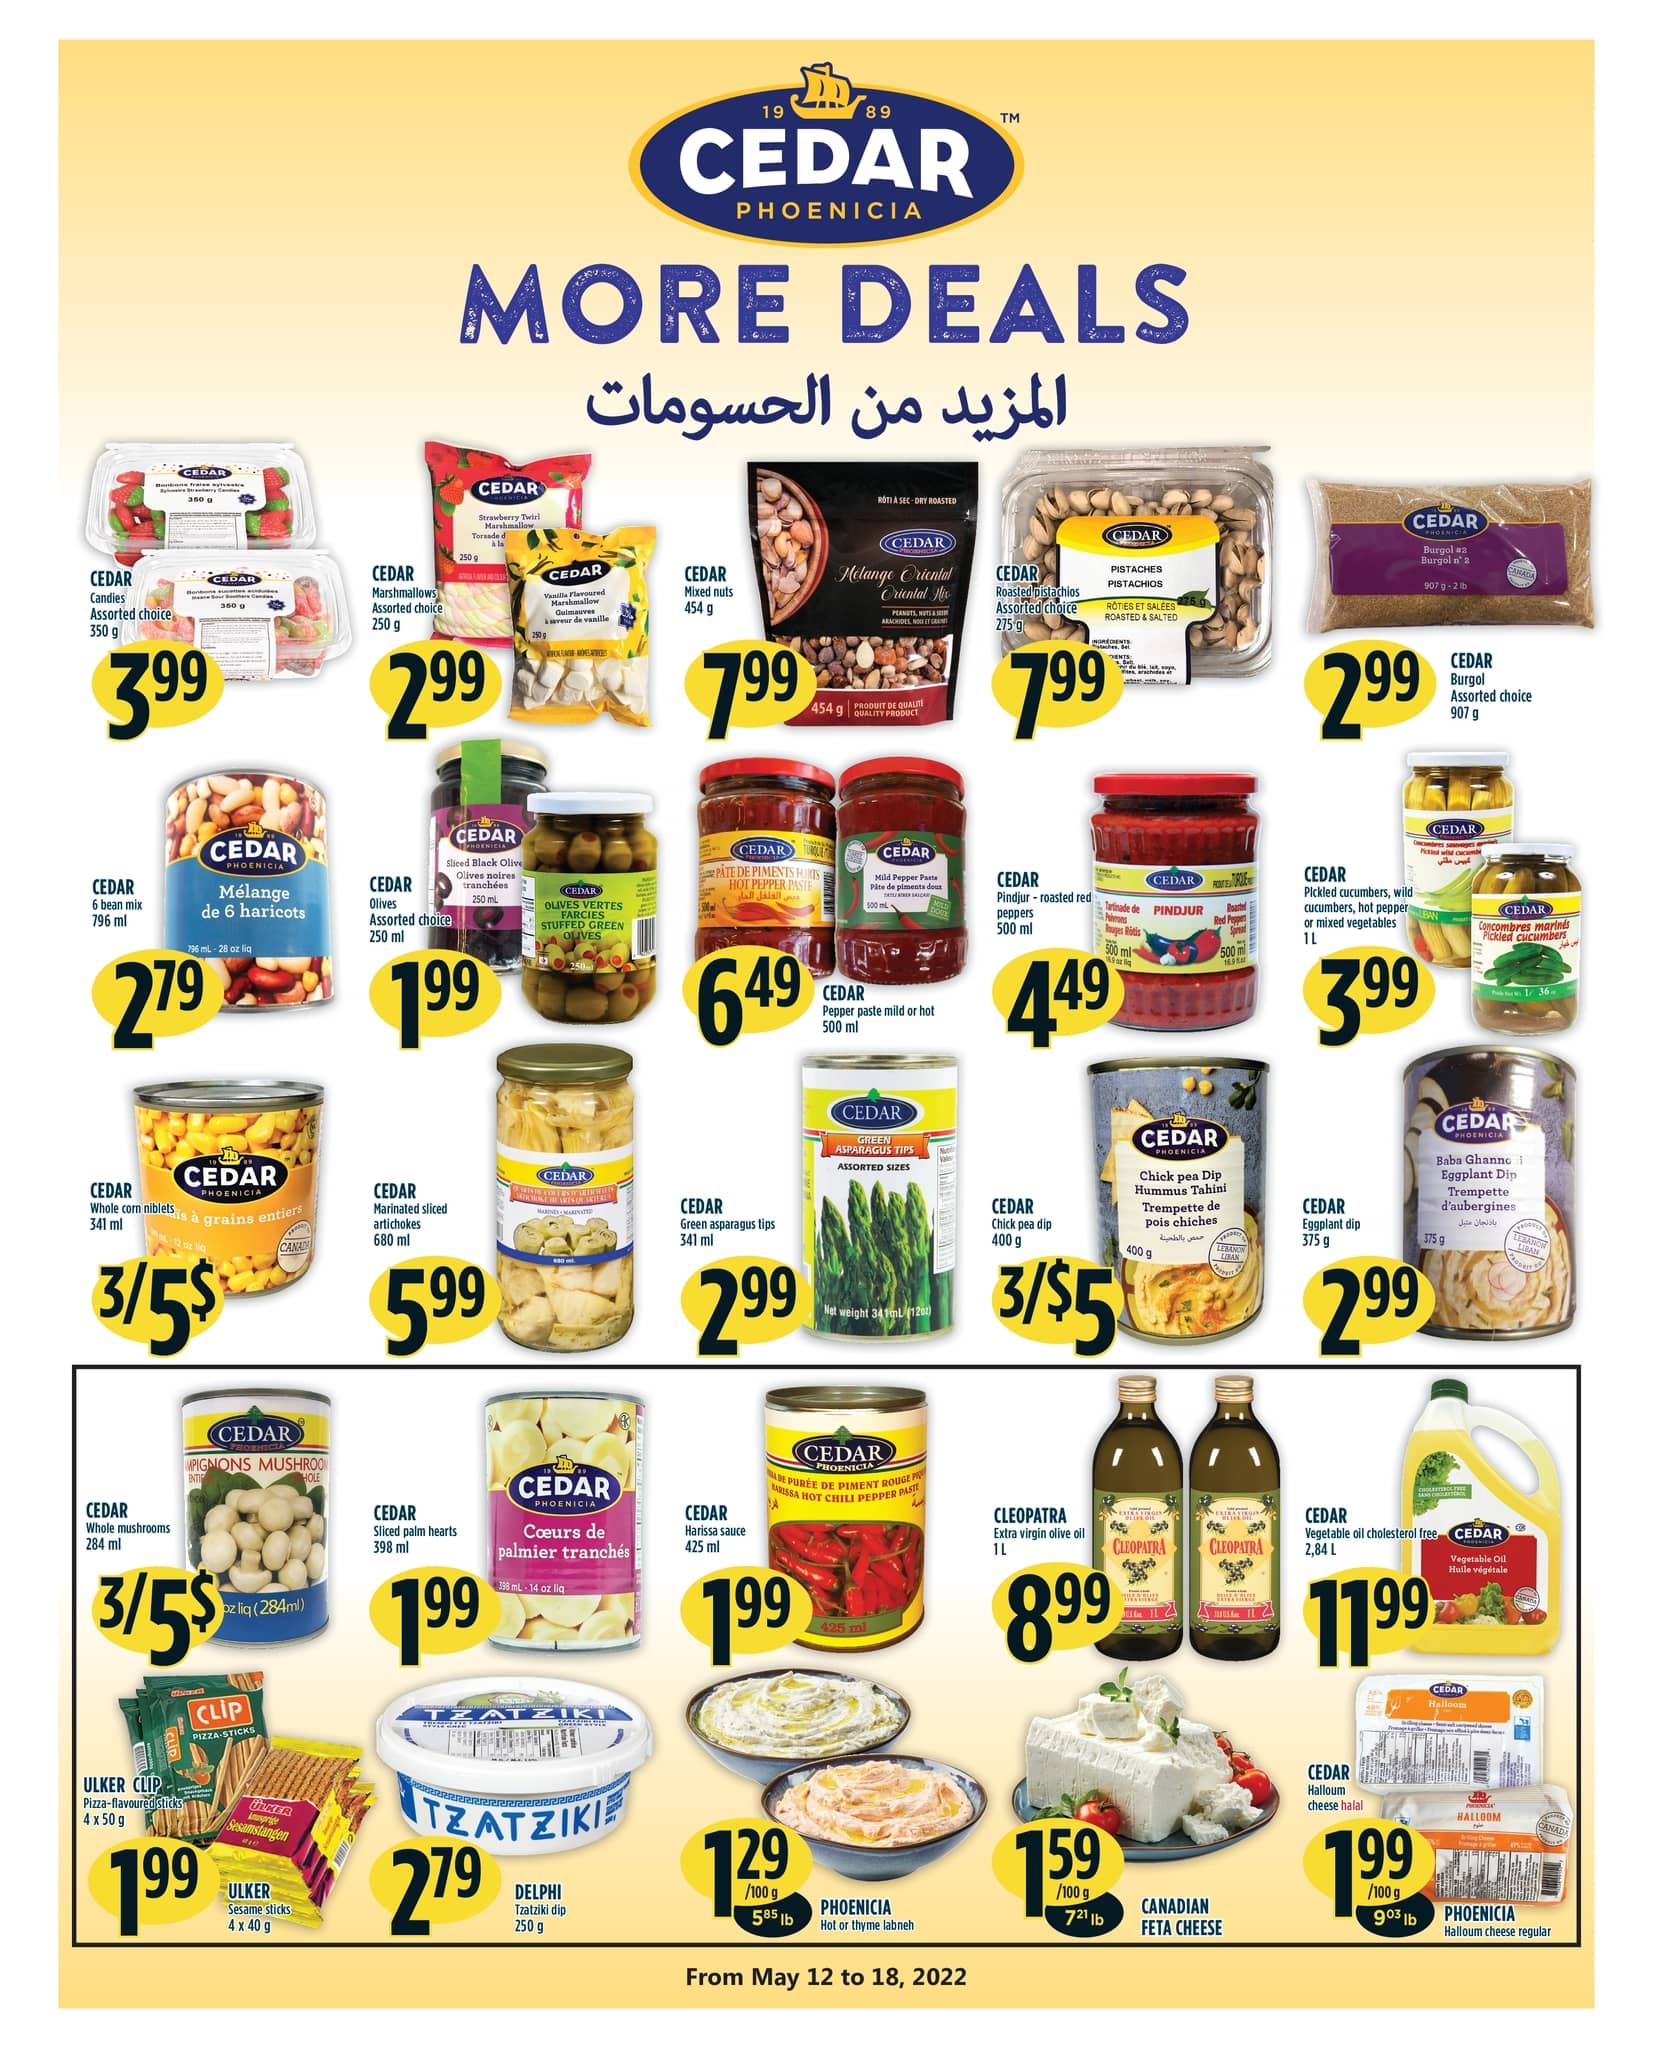 Adonis - Weekly Flyer Specials - Page 5